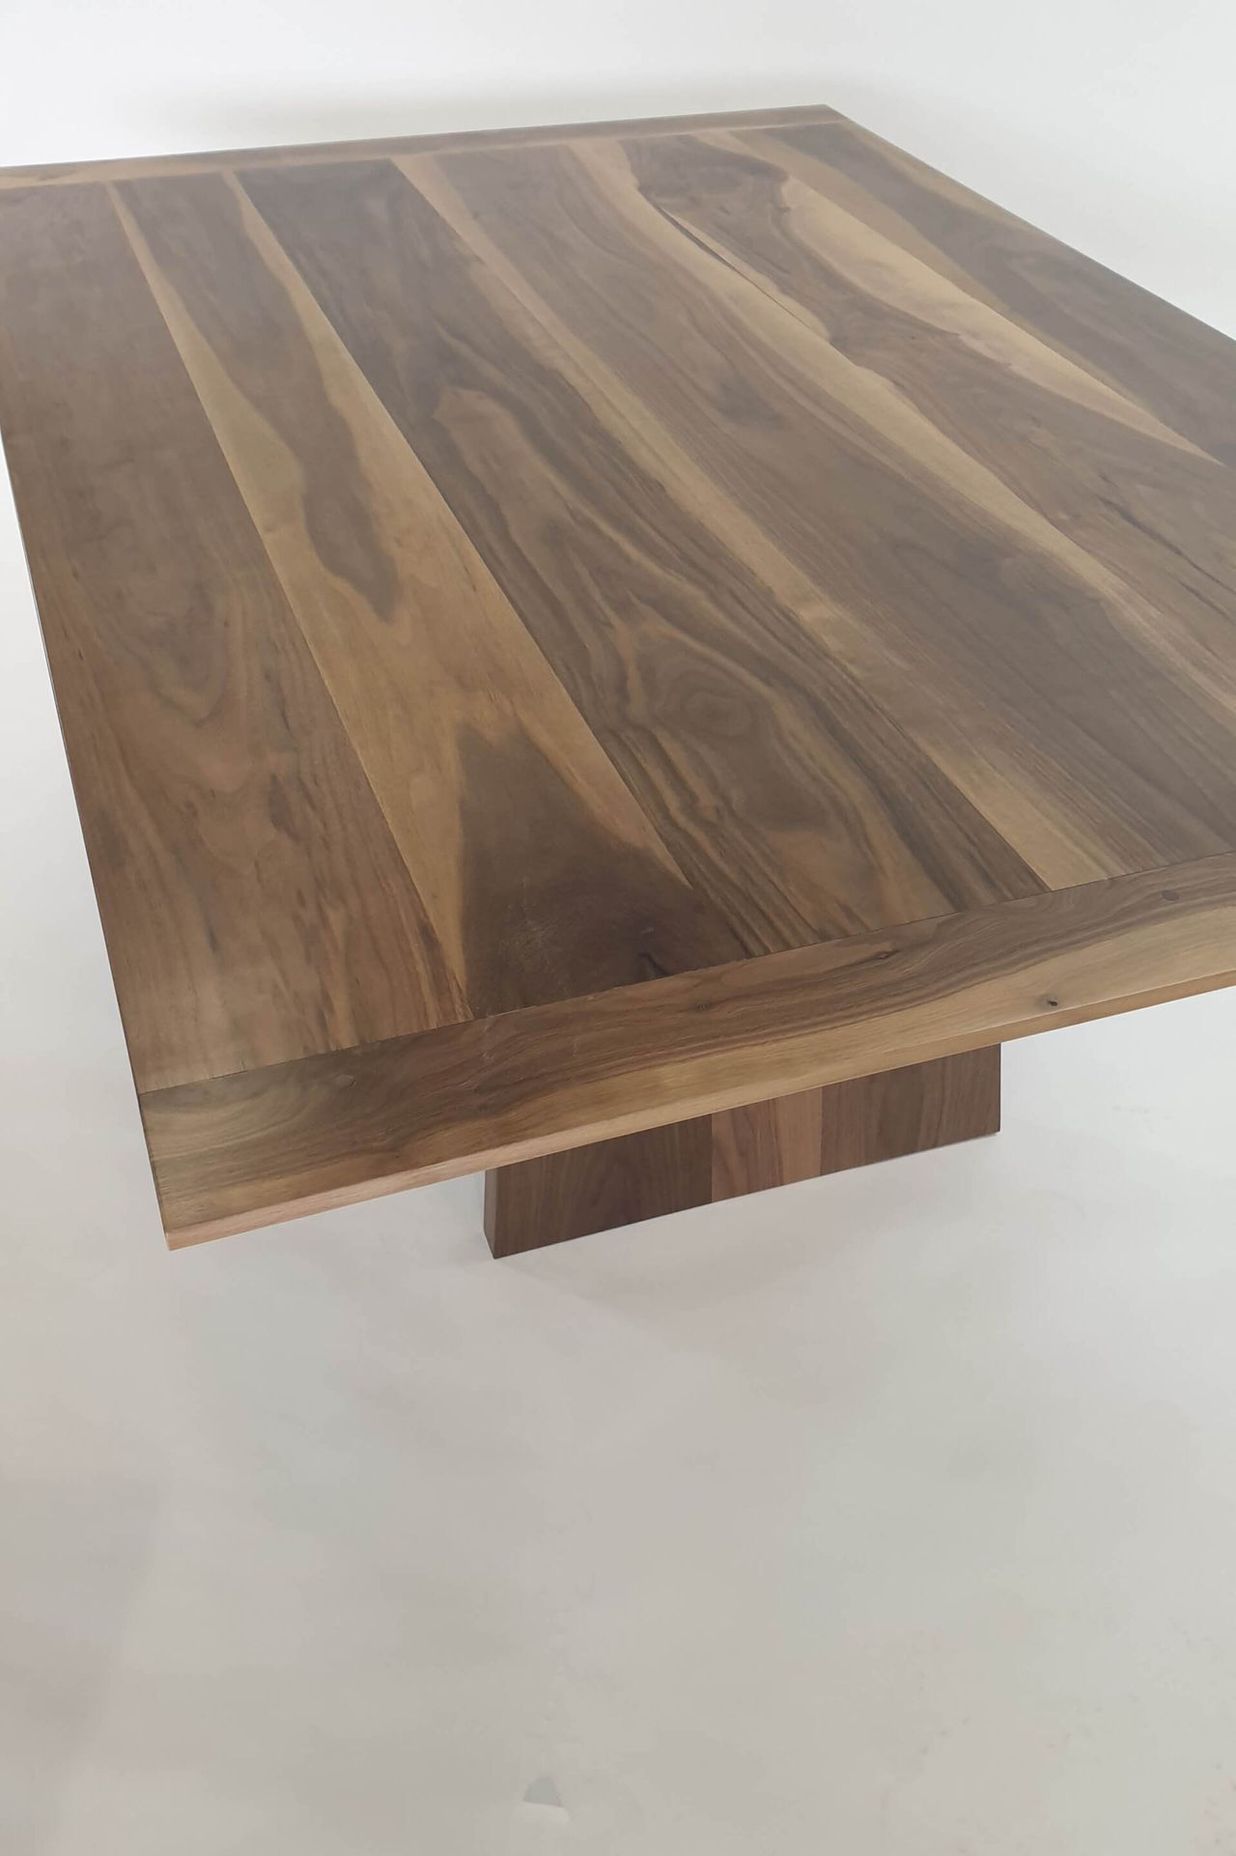 Handcrafted Wood Dining Table